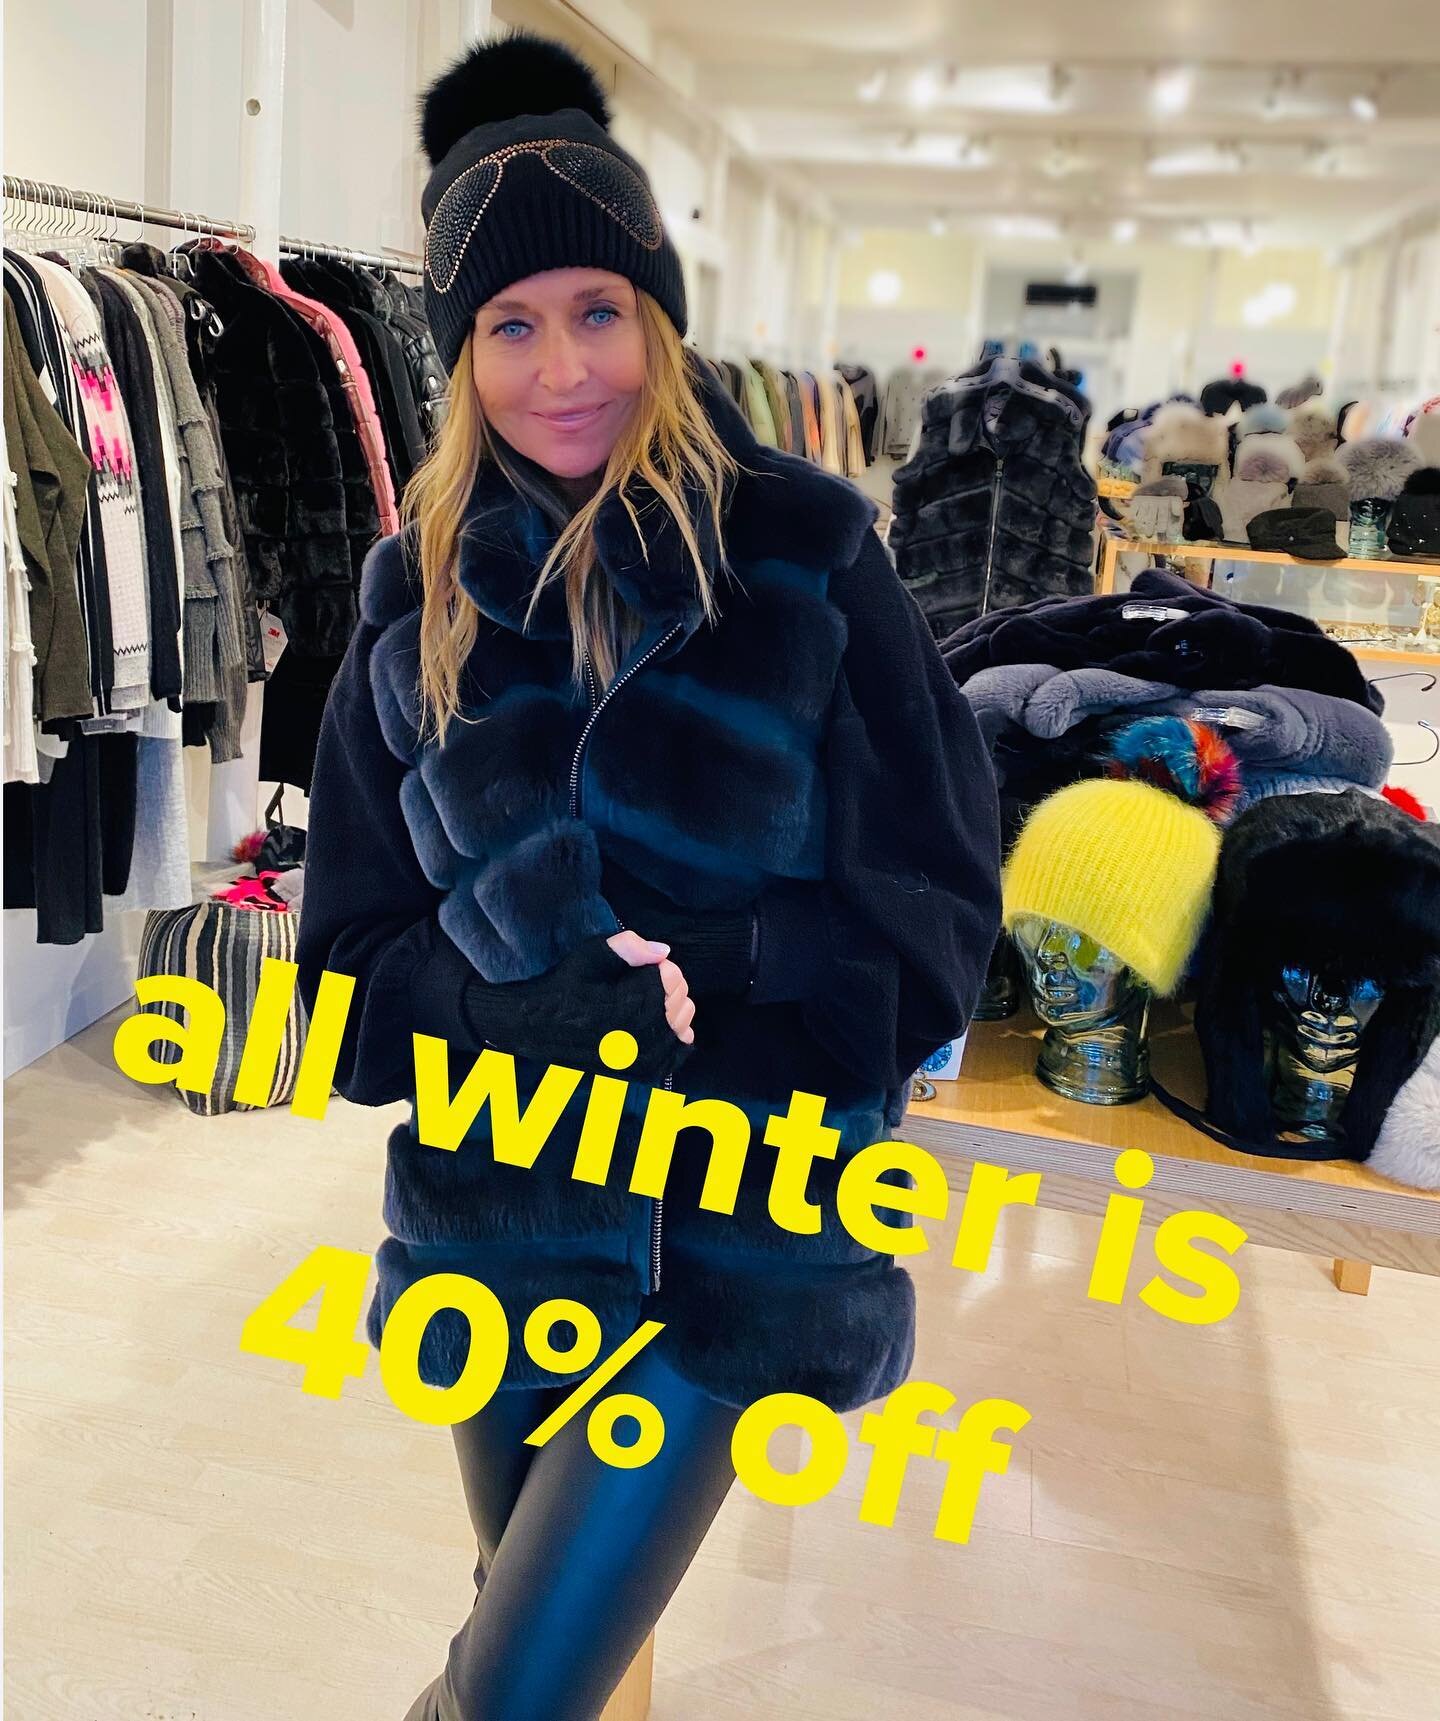 shop our SALE! Everything is 40% off🤩Coats, sweaters, hats and gloves. We&rsquo;ve got 70% off sale racks too! Half price jewelry⭐️#itsamazing #bigsale #goodstuff #easthampton